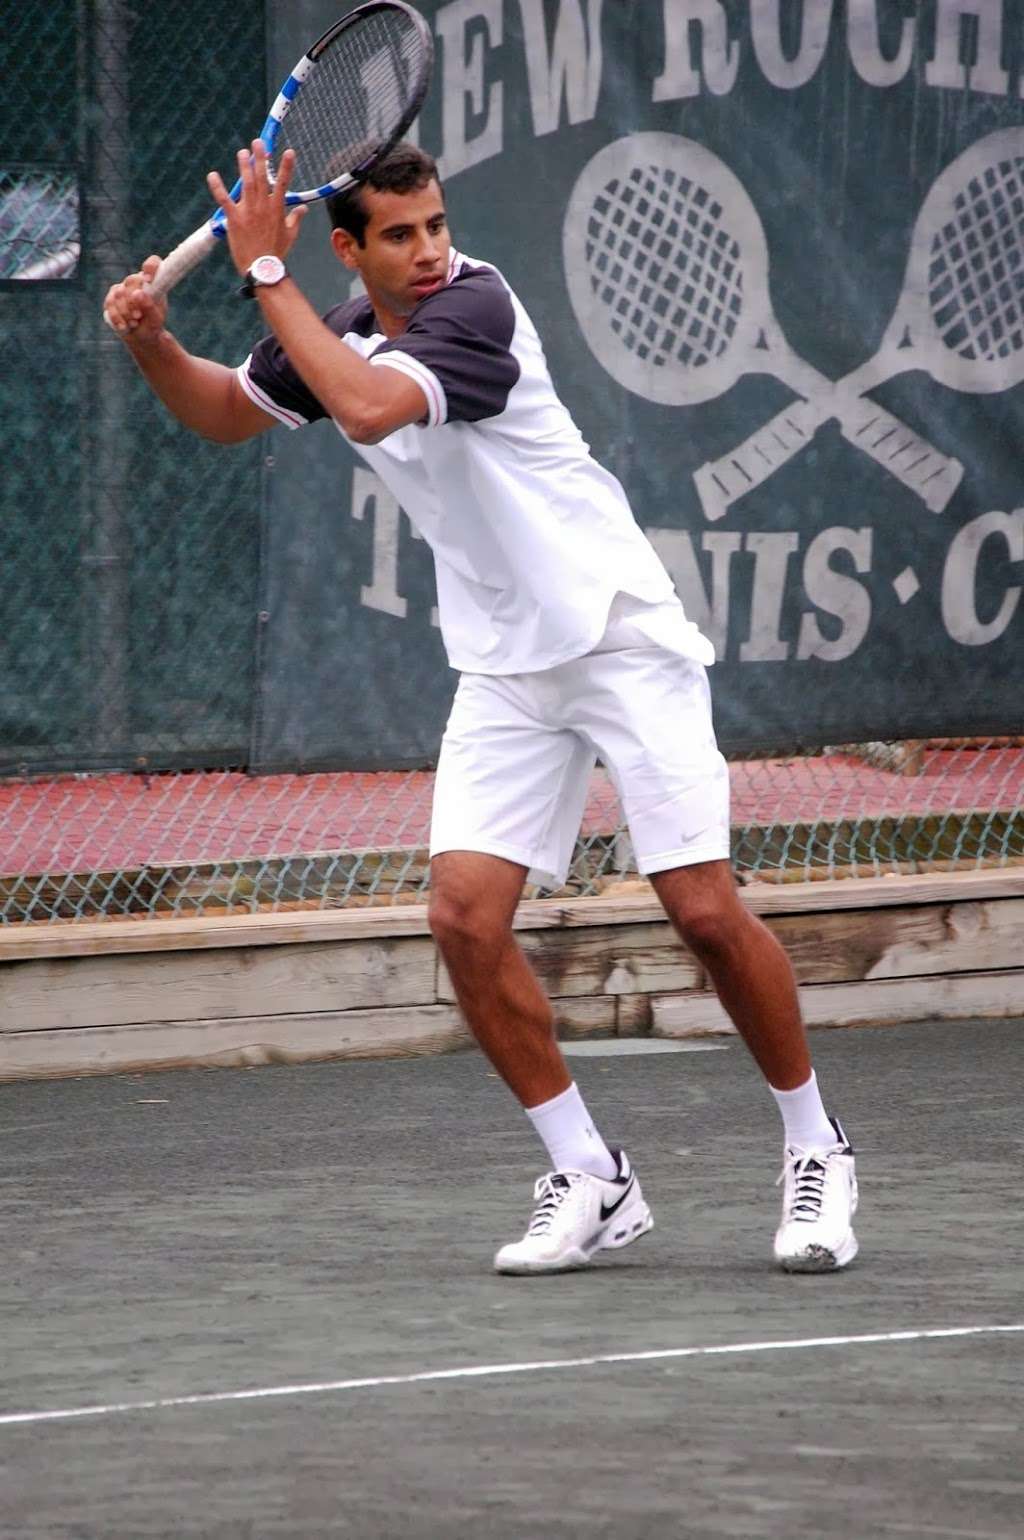 New Rochelle Tennis Club | 114 Valley Rd, New Rochelle, NY 10804, USA | Phone: (914) 633-3388